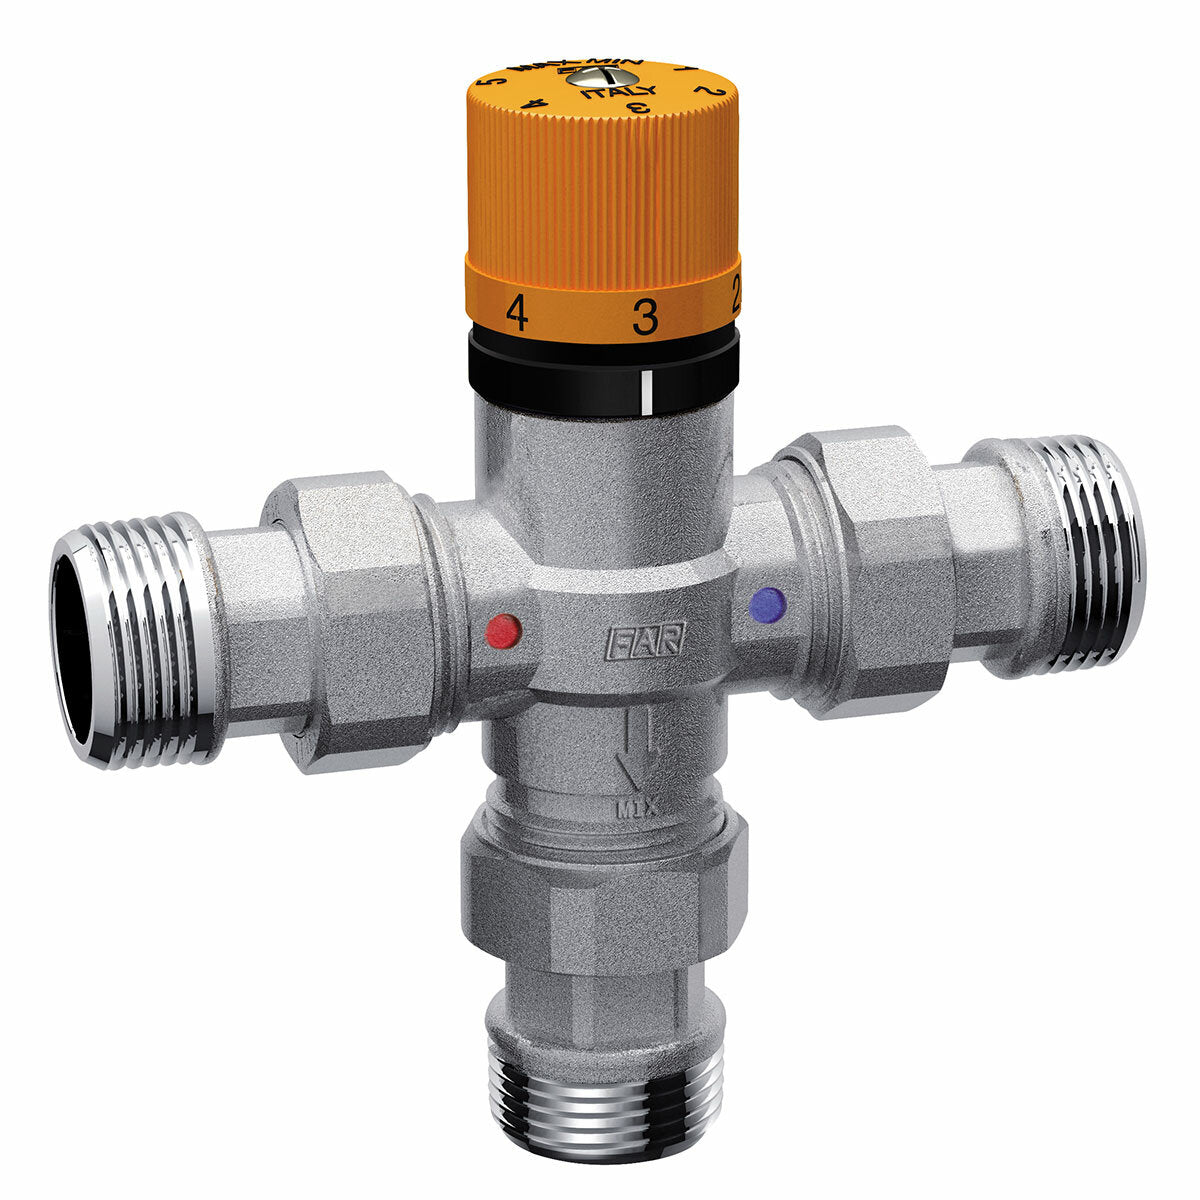 FAR thermostatic mixing valve for solar systems 1”